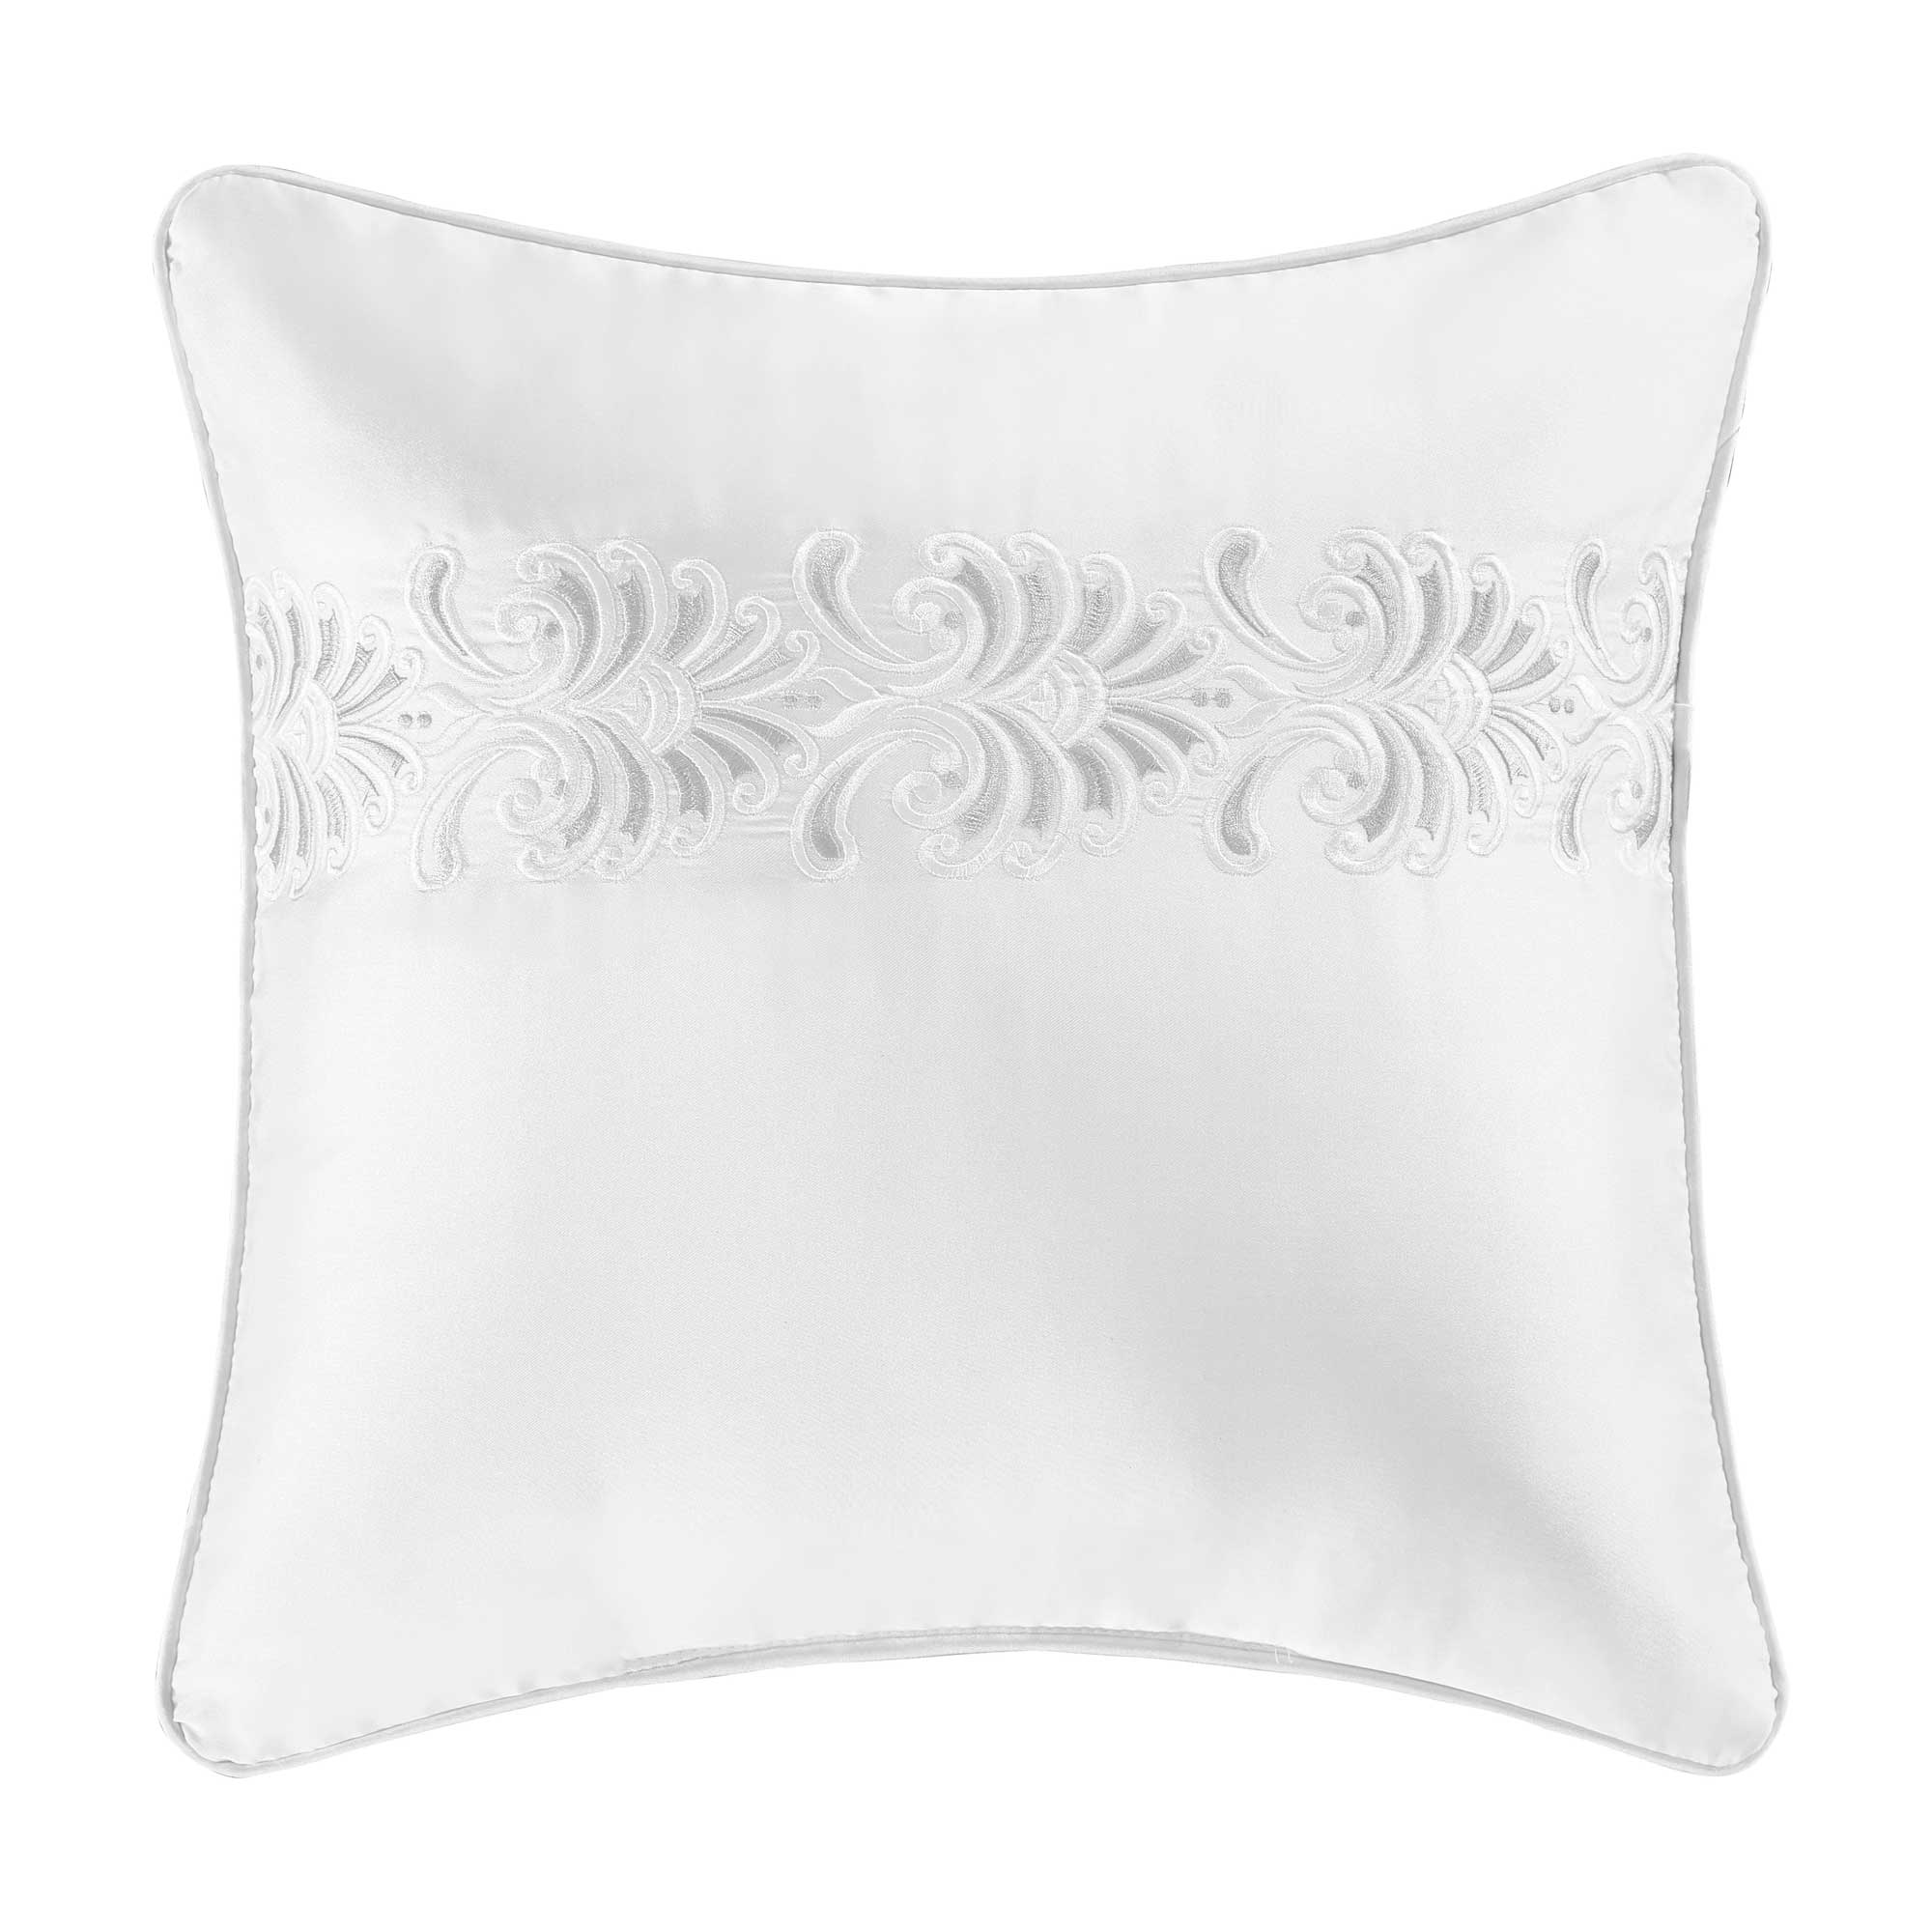 https://www.homethreads.com/files/bedding/becco-18-square-embellished-decorative-throw-pillow-coverlet.jpg